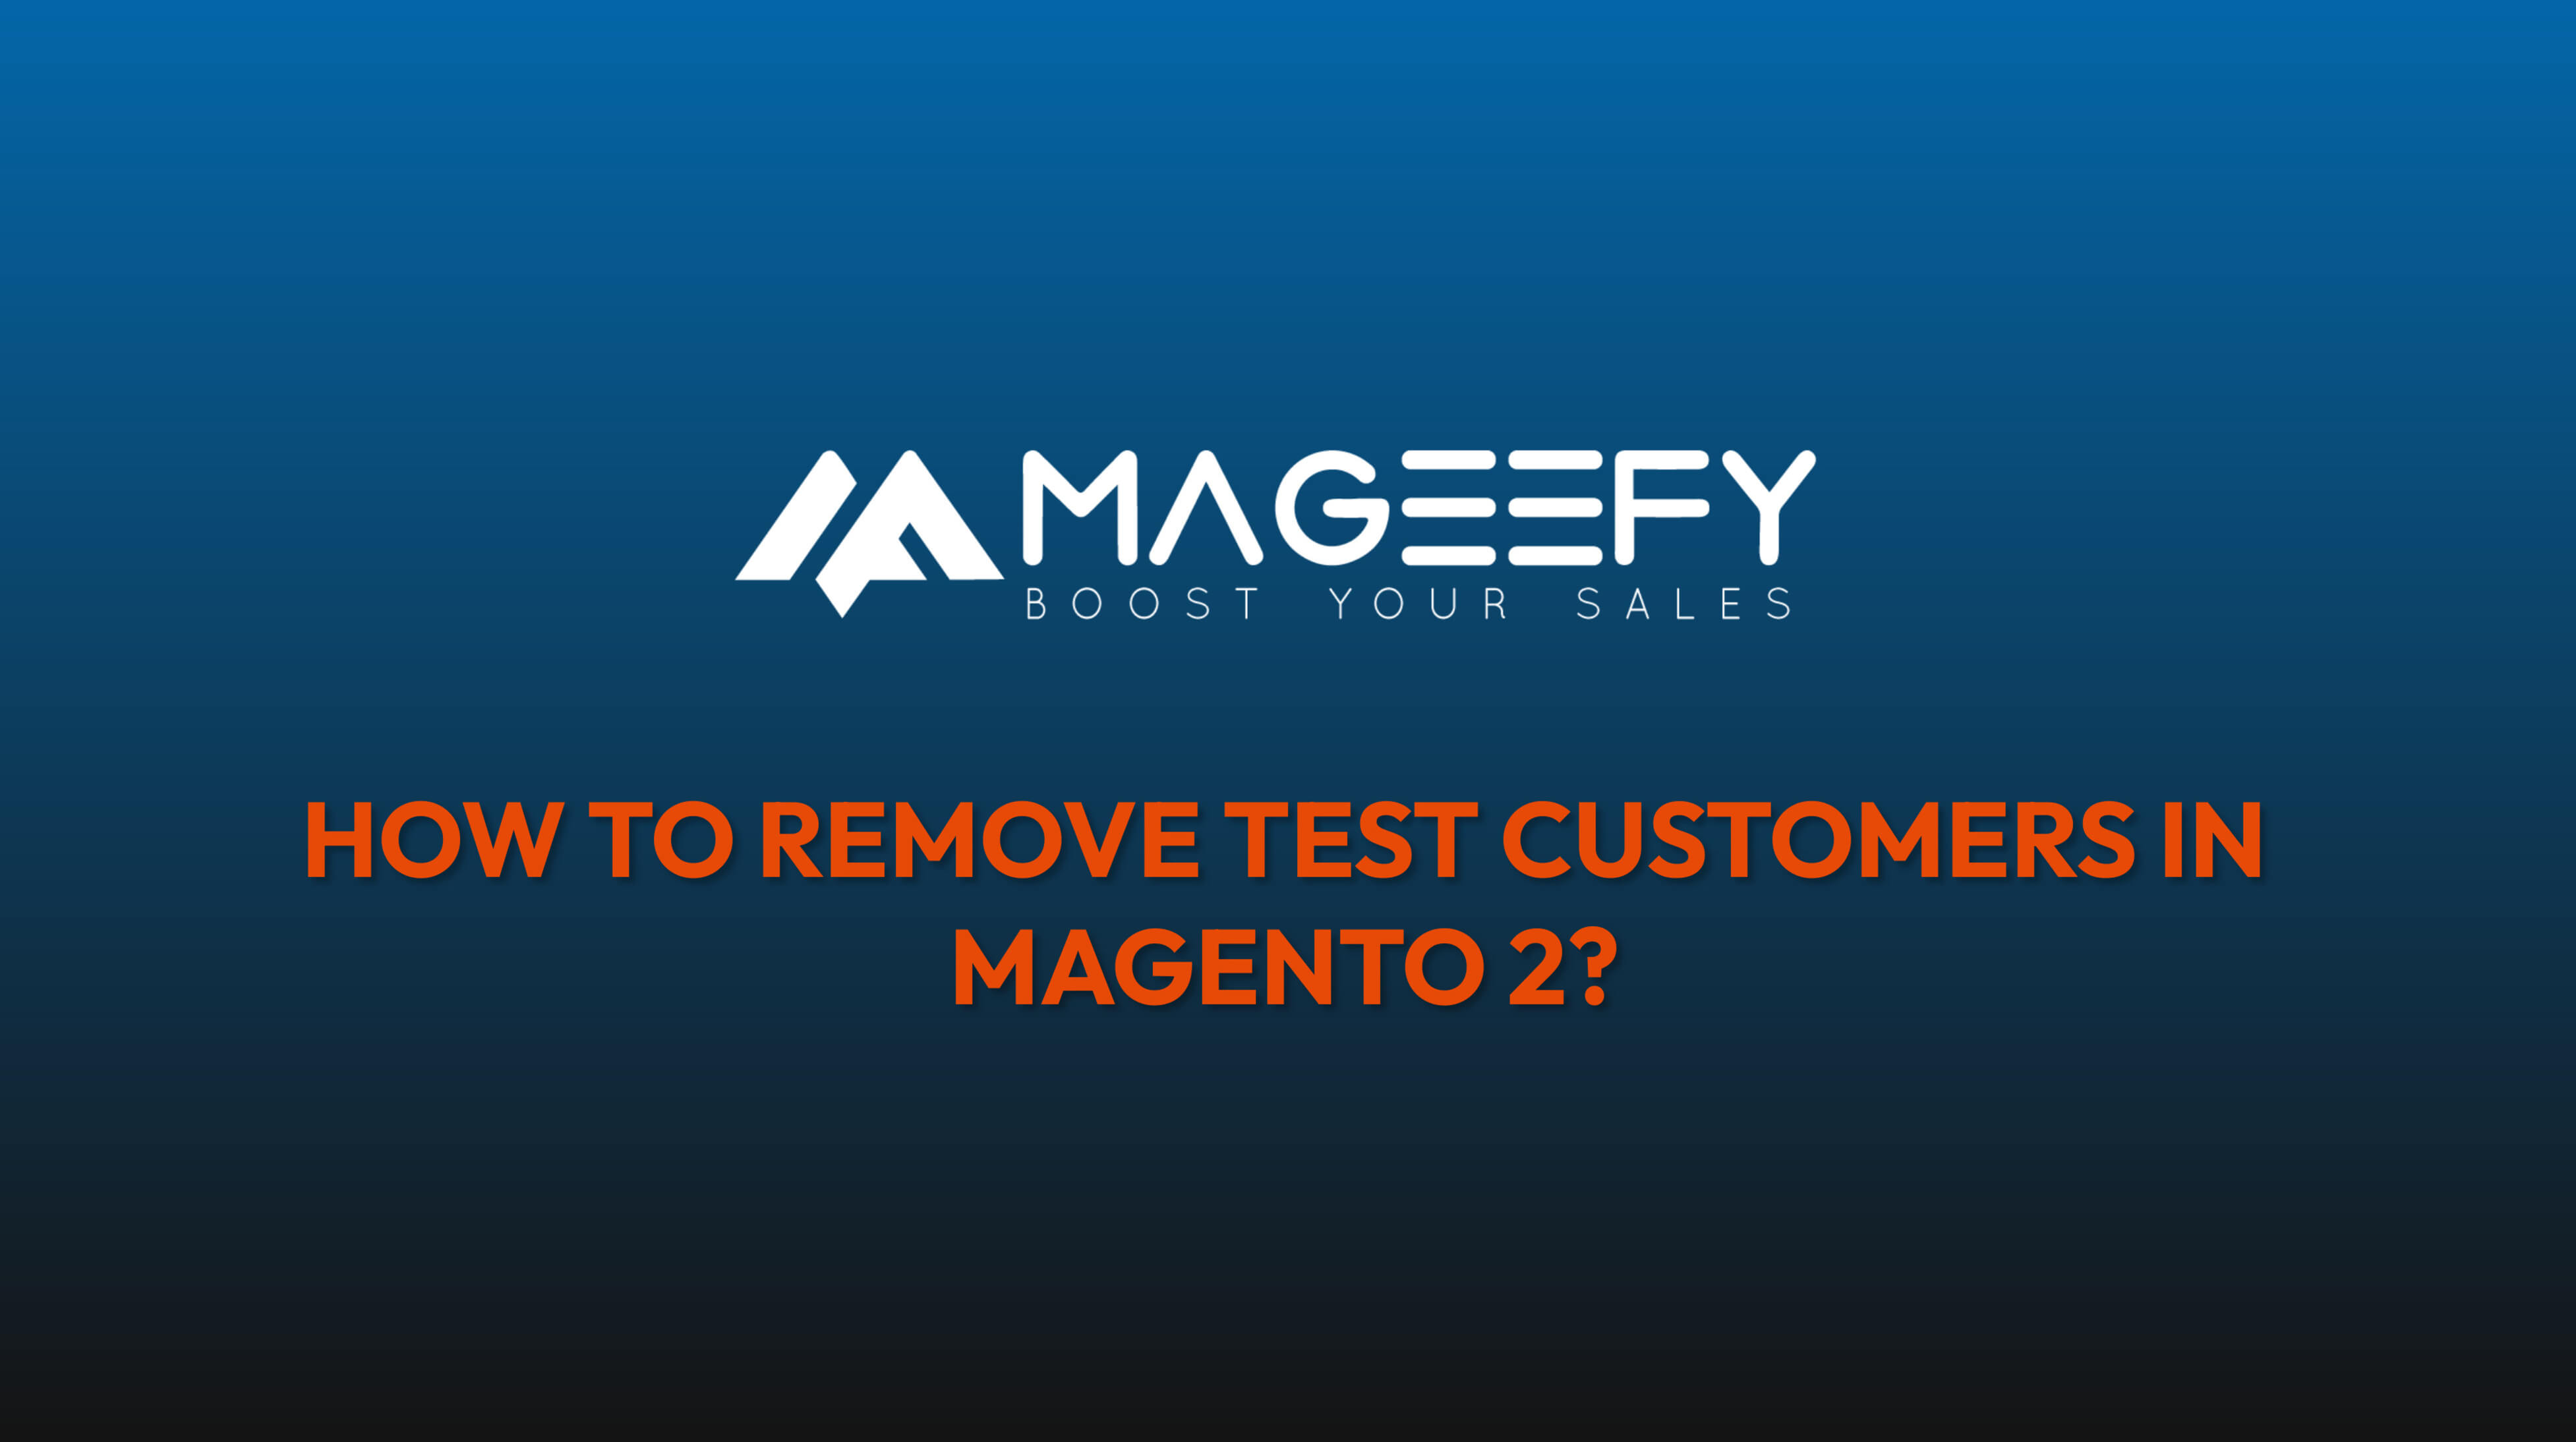 How to remove test customers in magento 2?